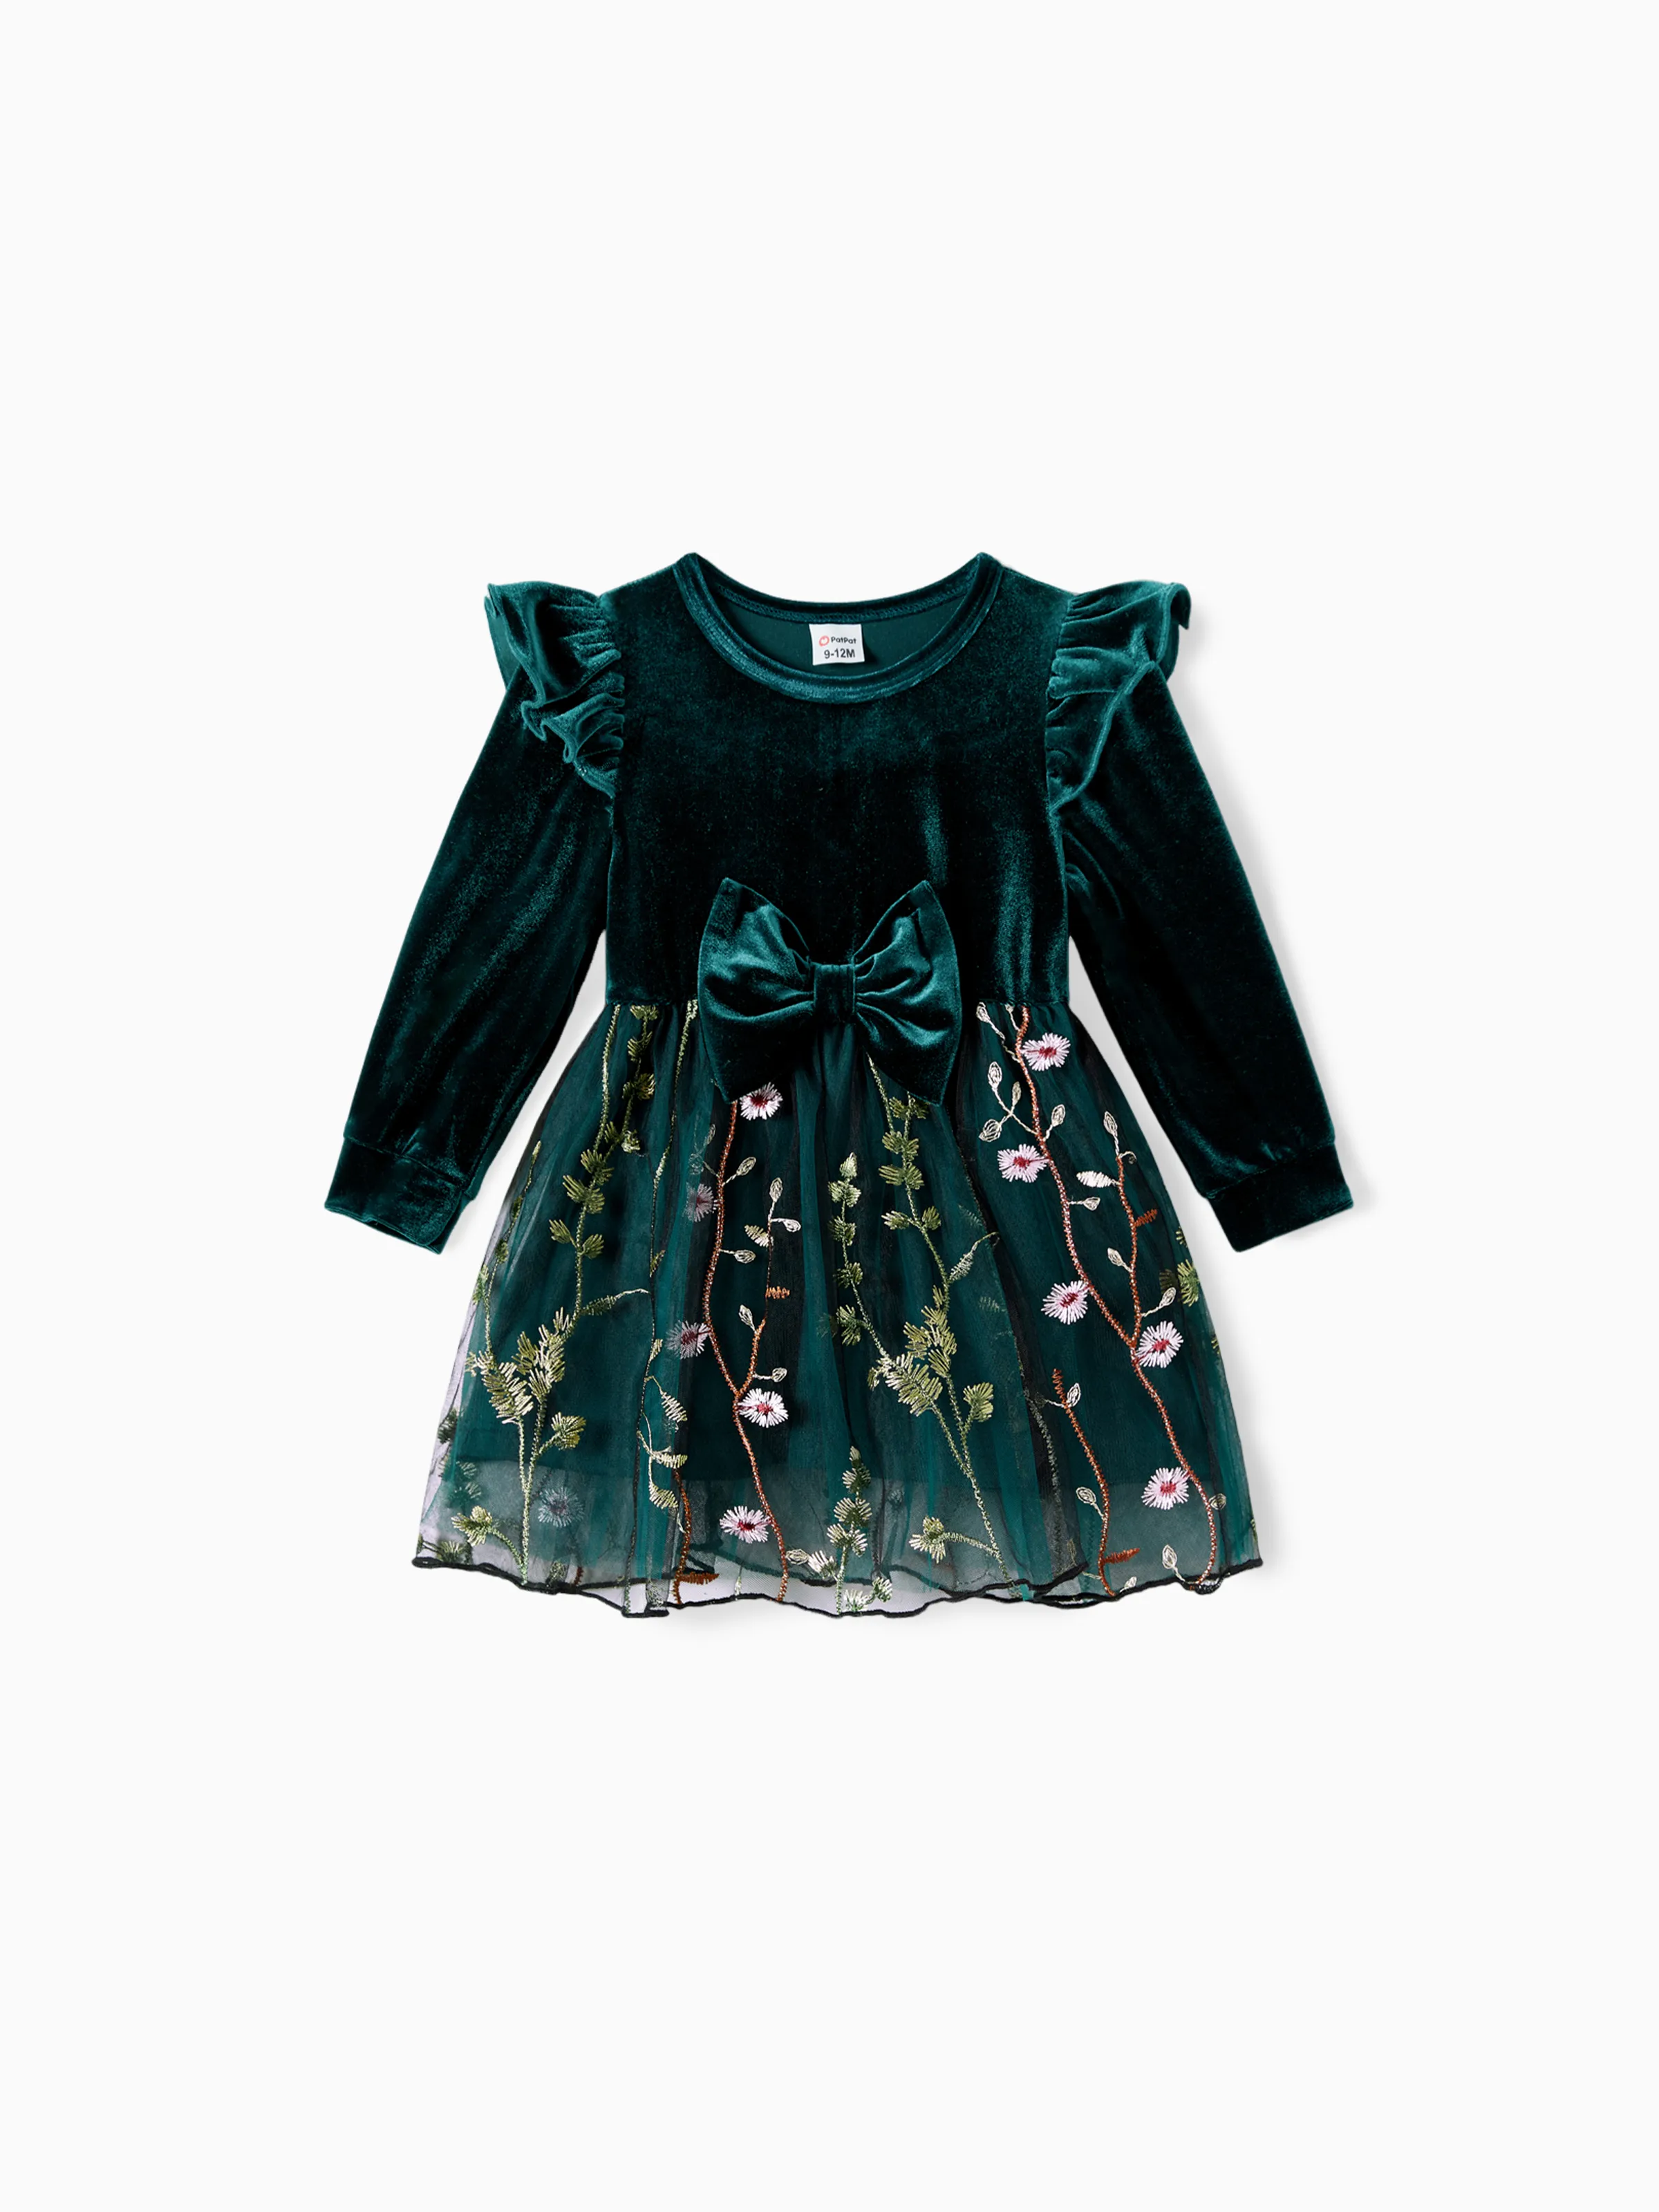 

Mommy and Me Casual Dresses - Big Flower Print, Medium Thickness, Short Sleeve, Opaque, Regular Fit